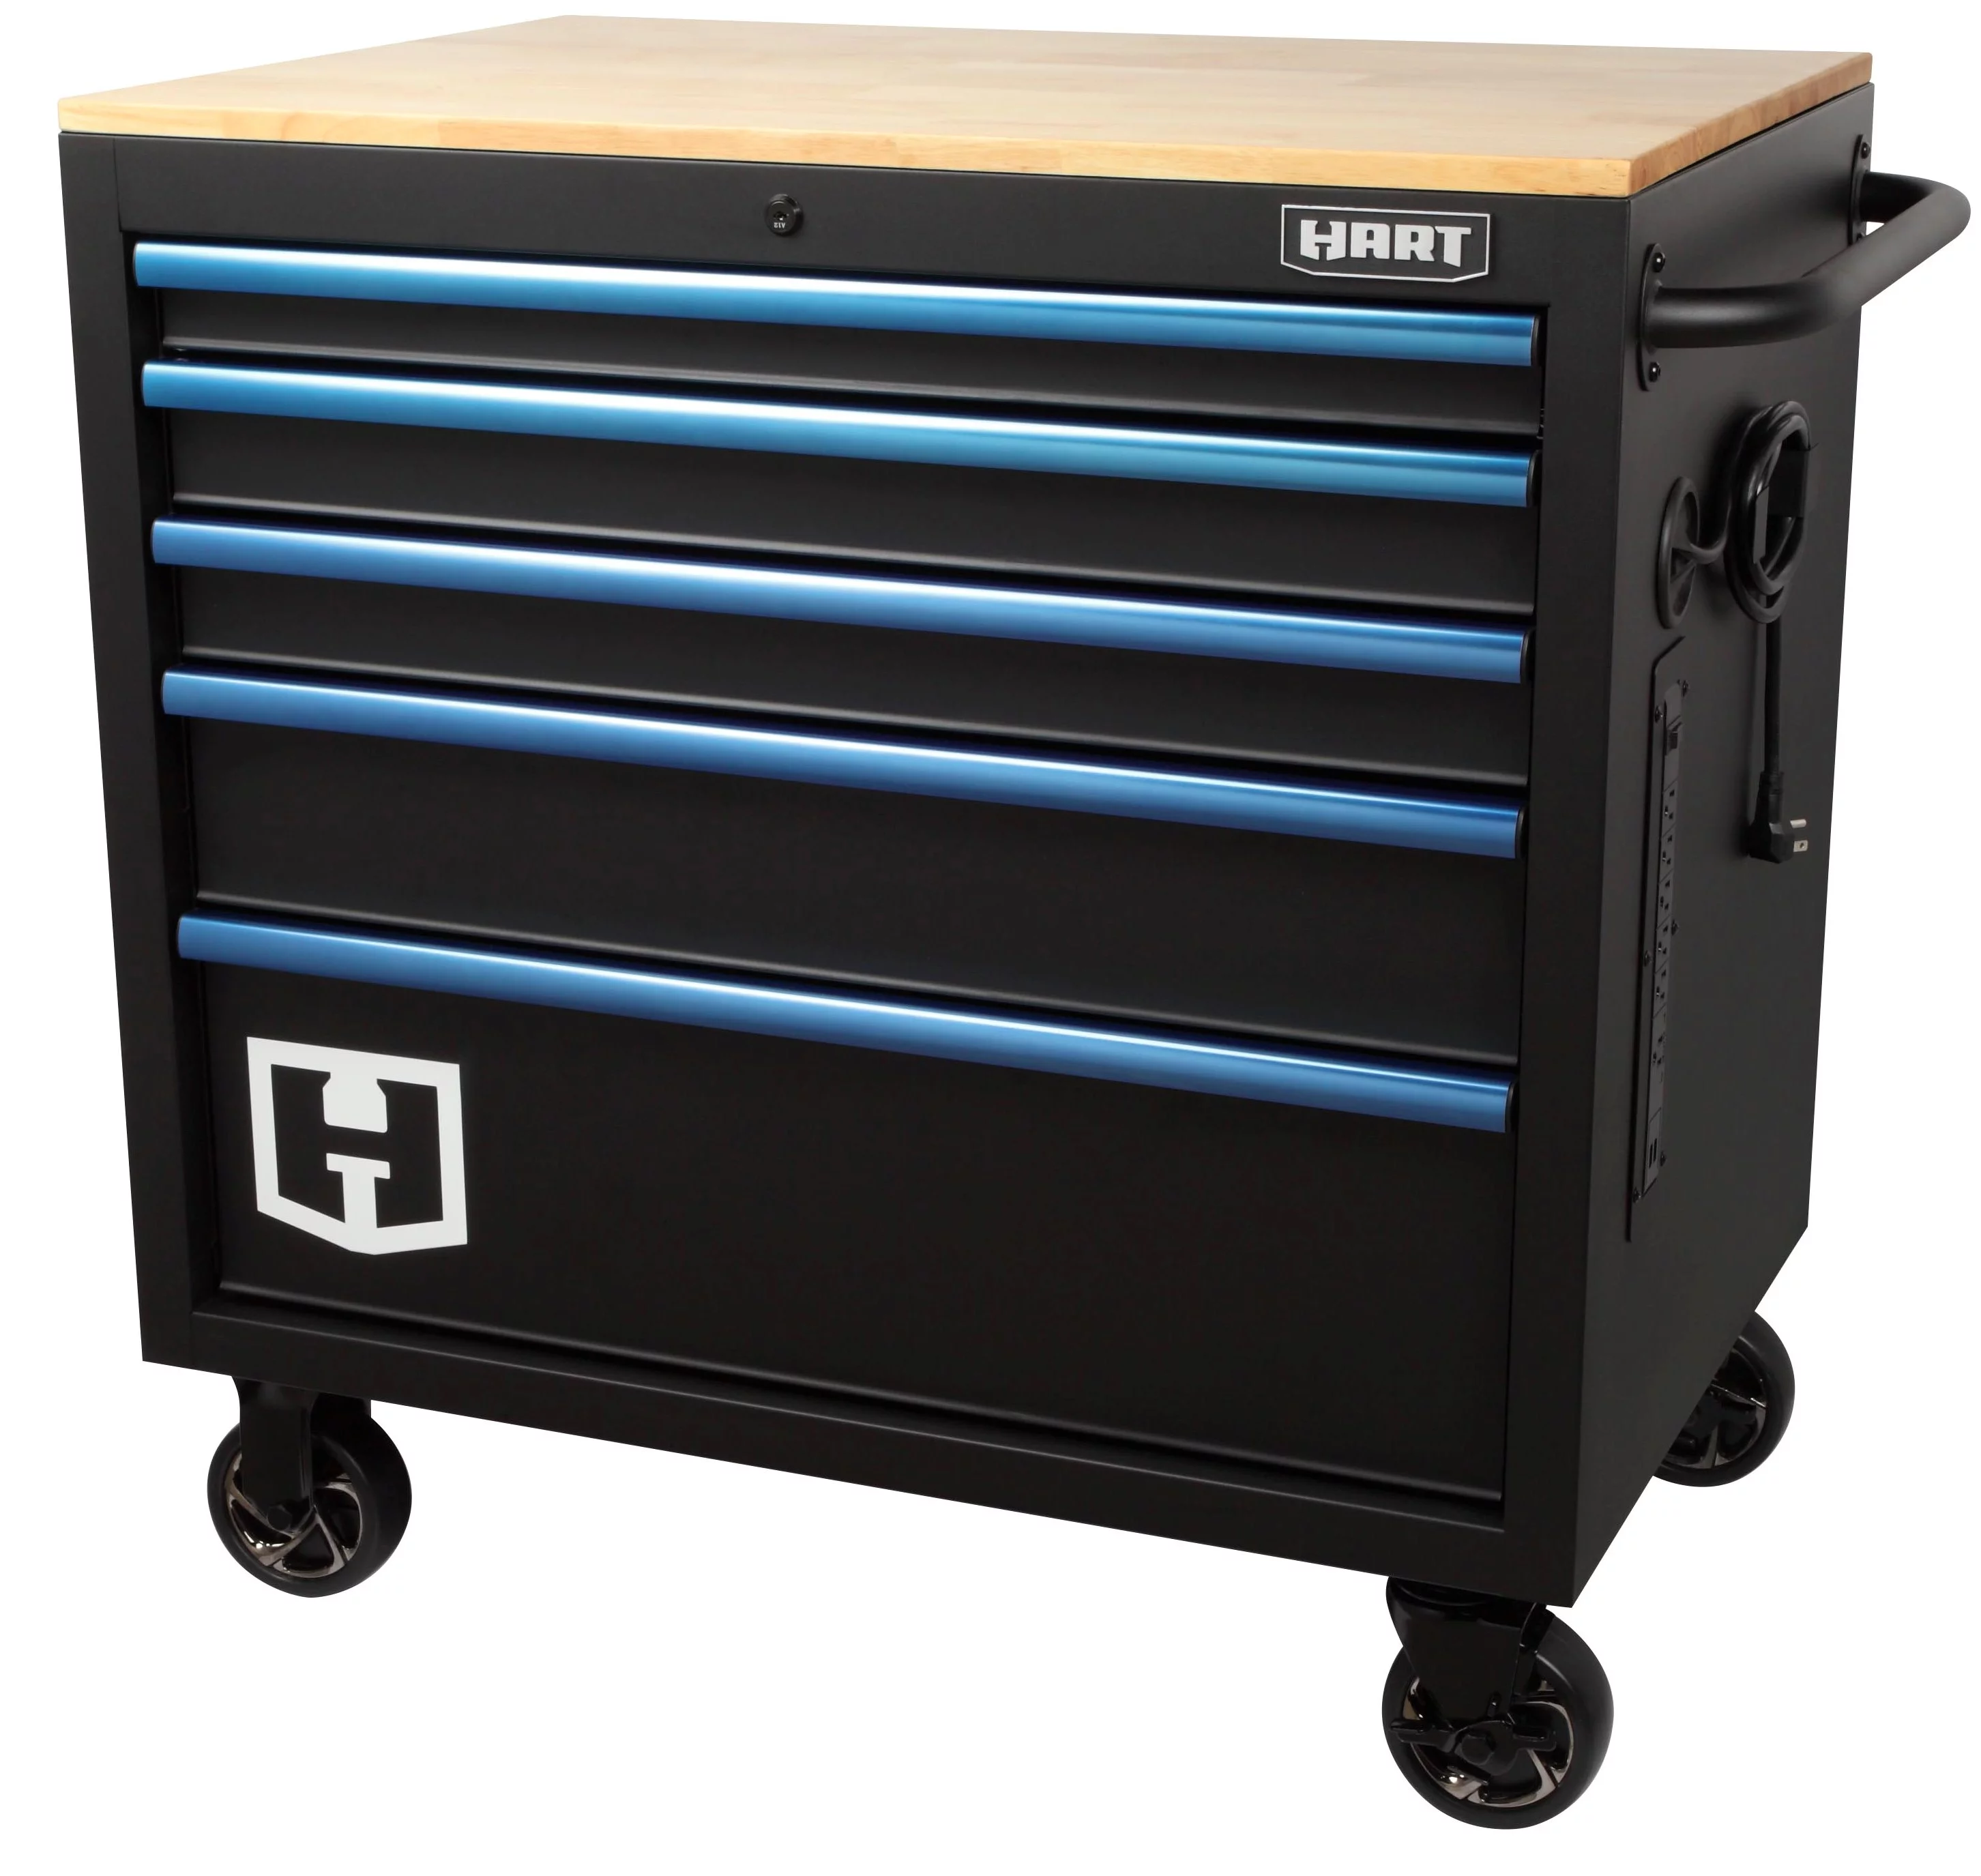 This Rolling Toolbox Is the Perfect Companion for Any Job